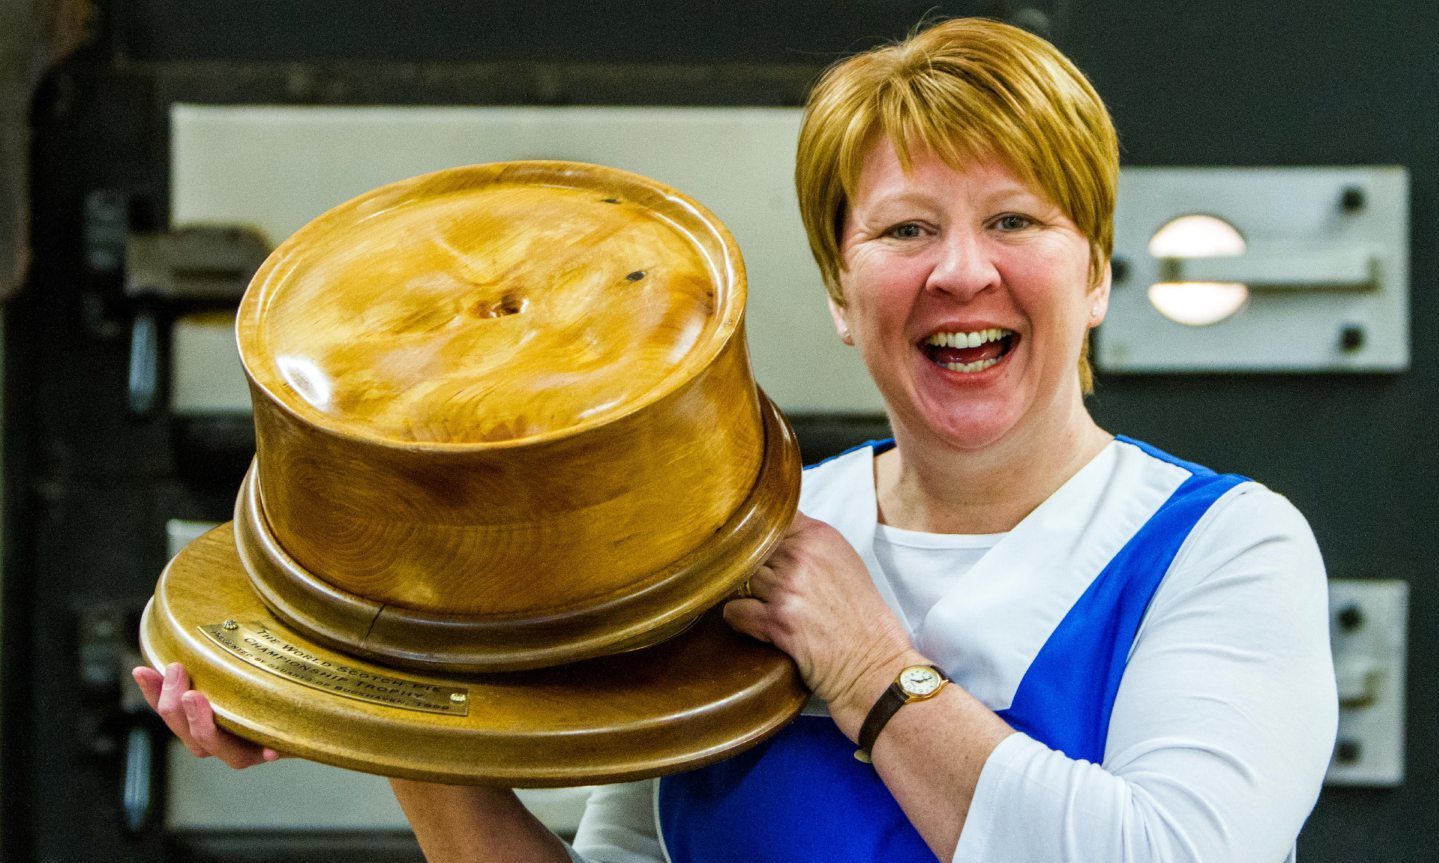 Linda Hill, of Murrays, with the trophy for winning the World Scotch Pie Championships.